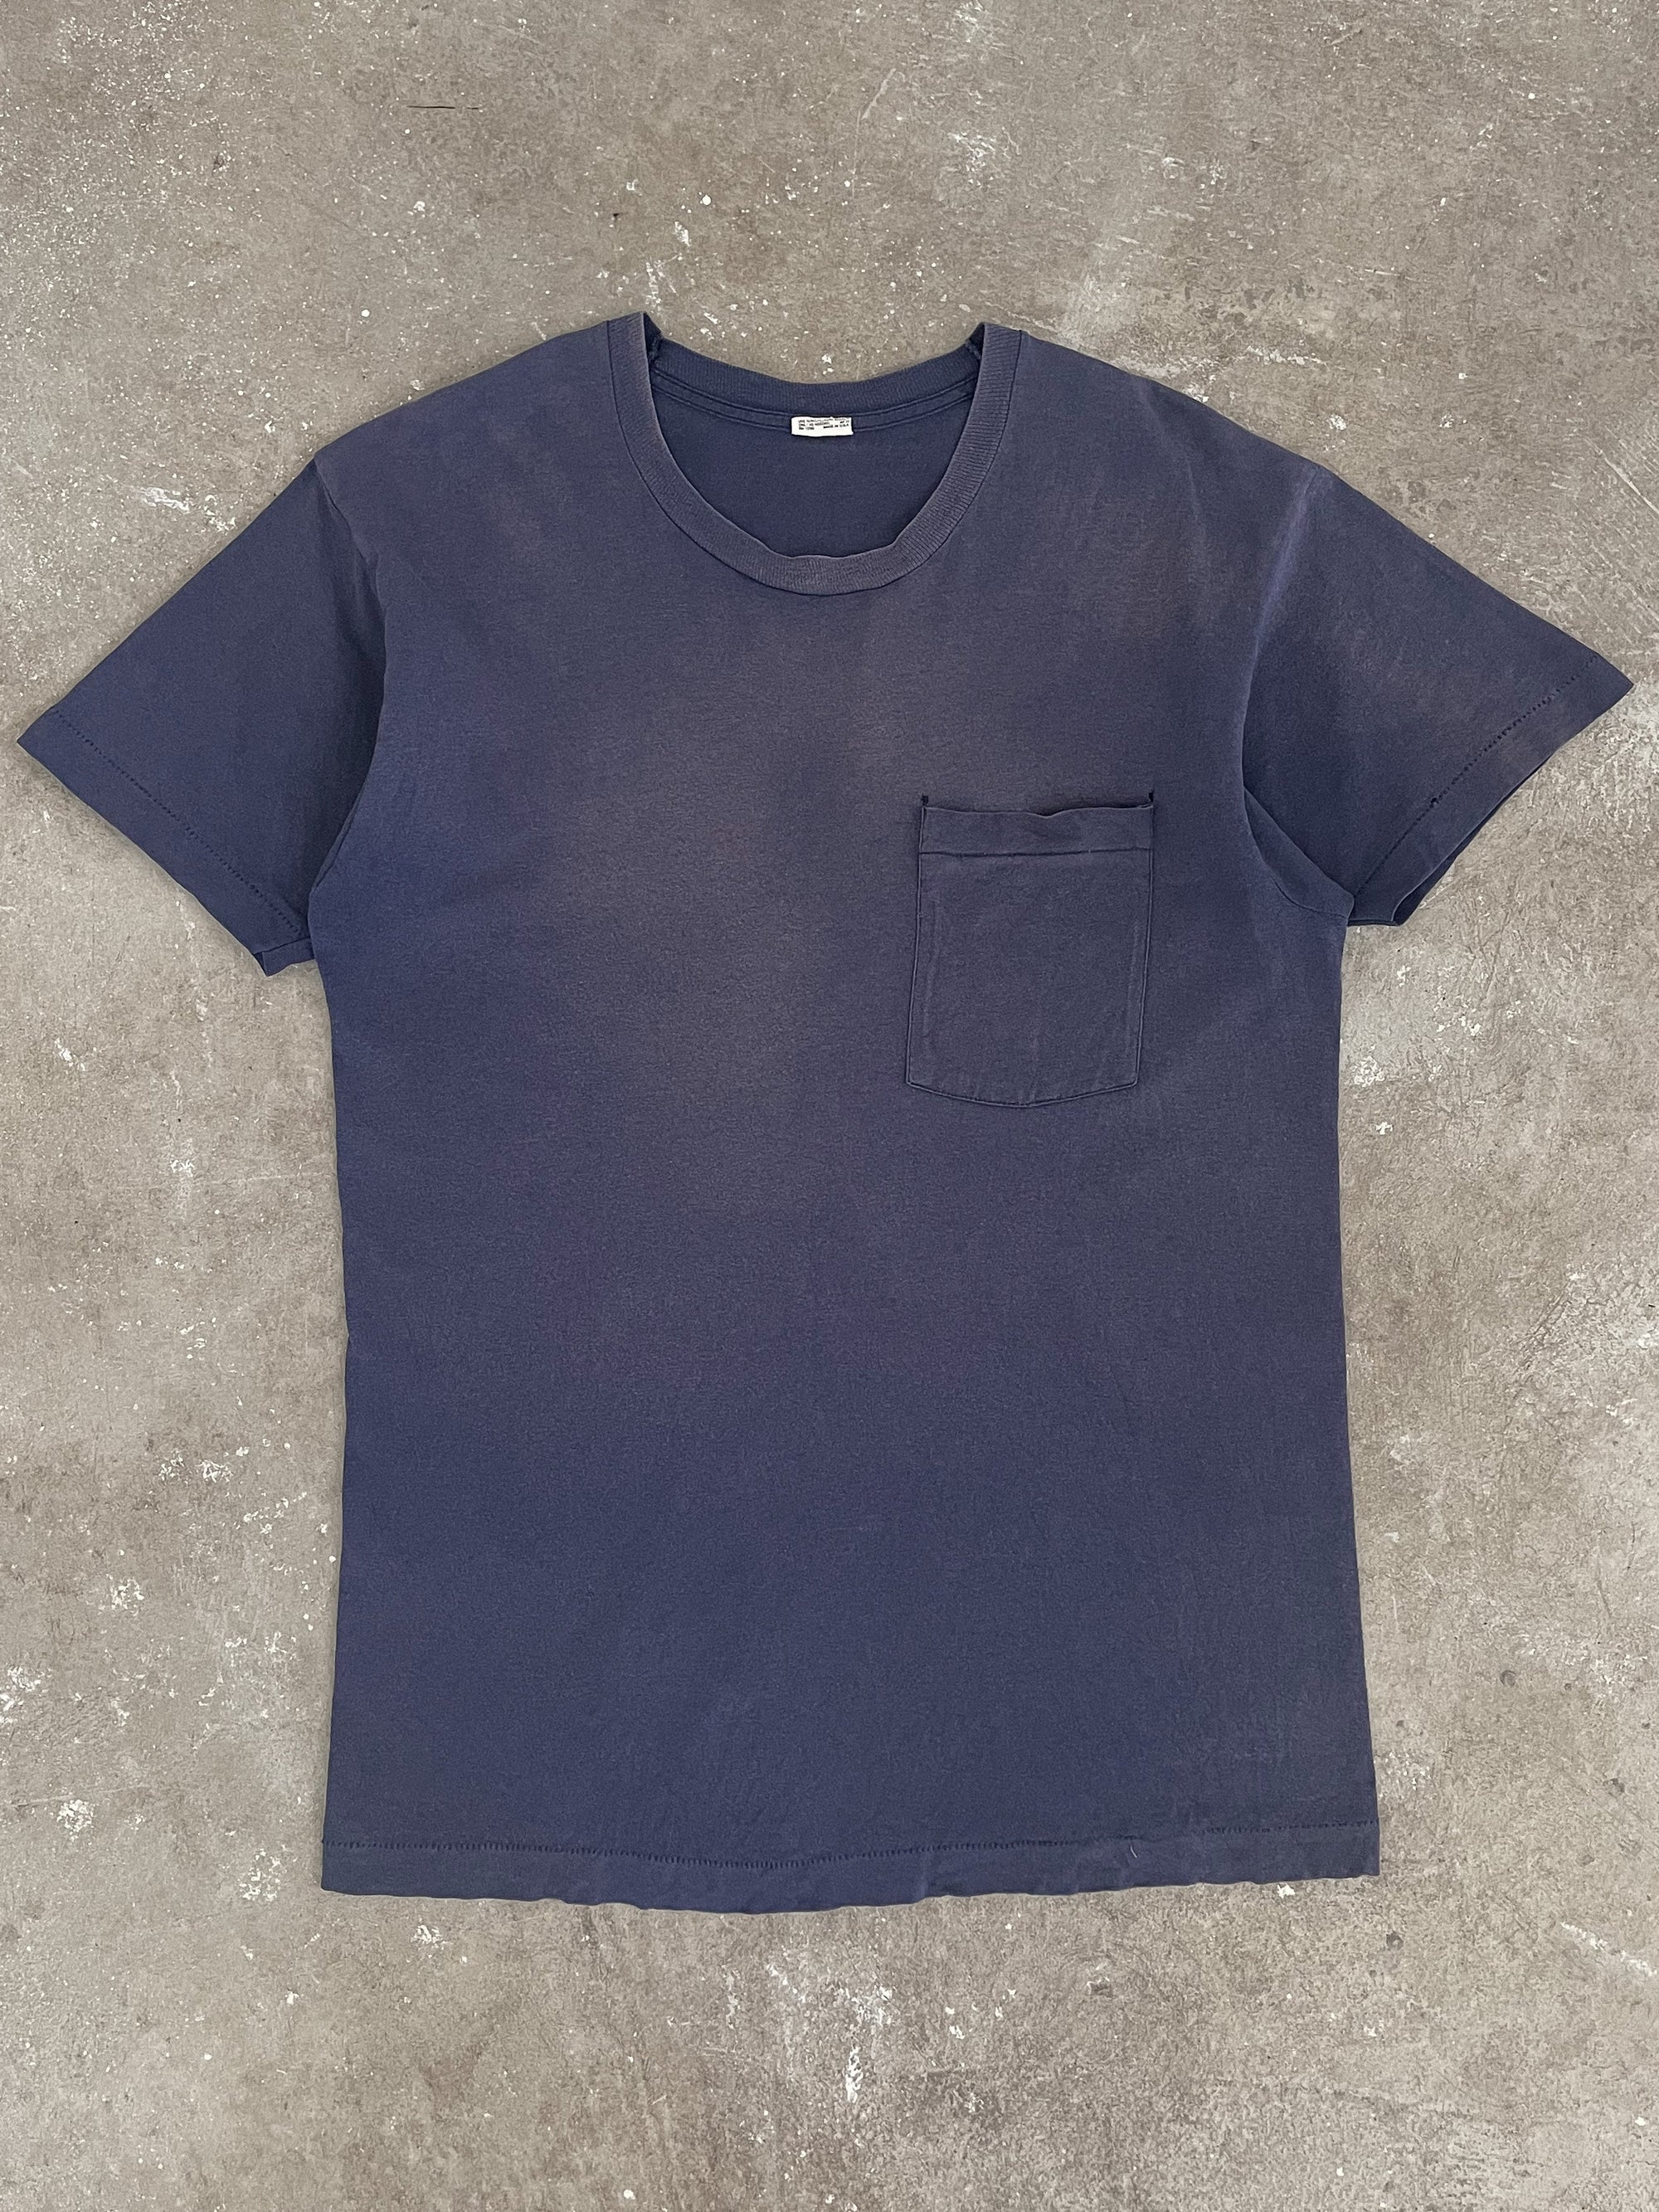 1990s Faded Navy Single Stitched Pocket Tee (M)